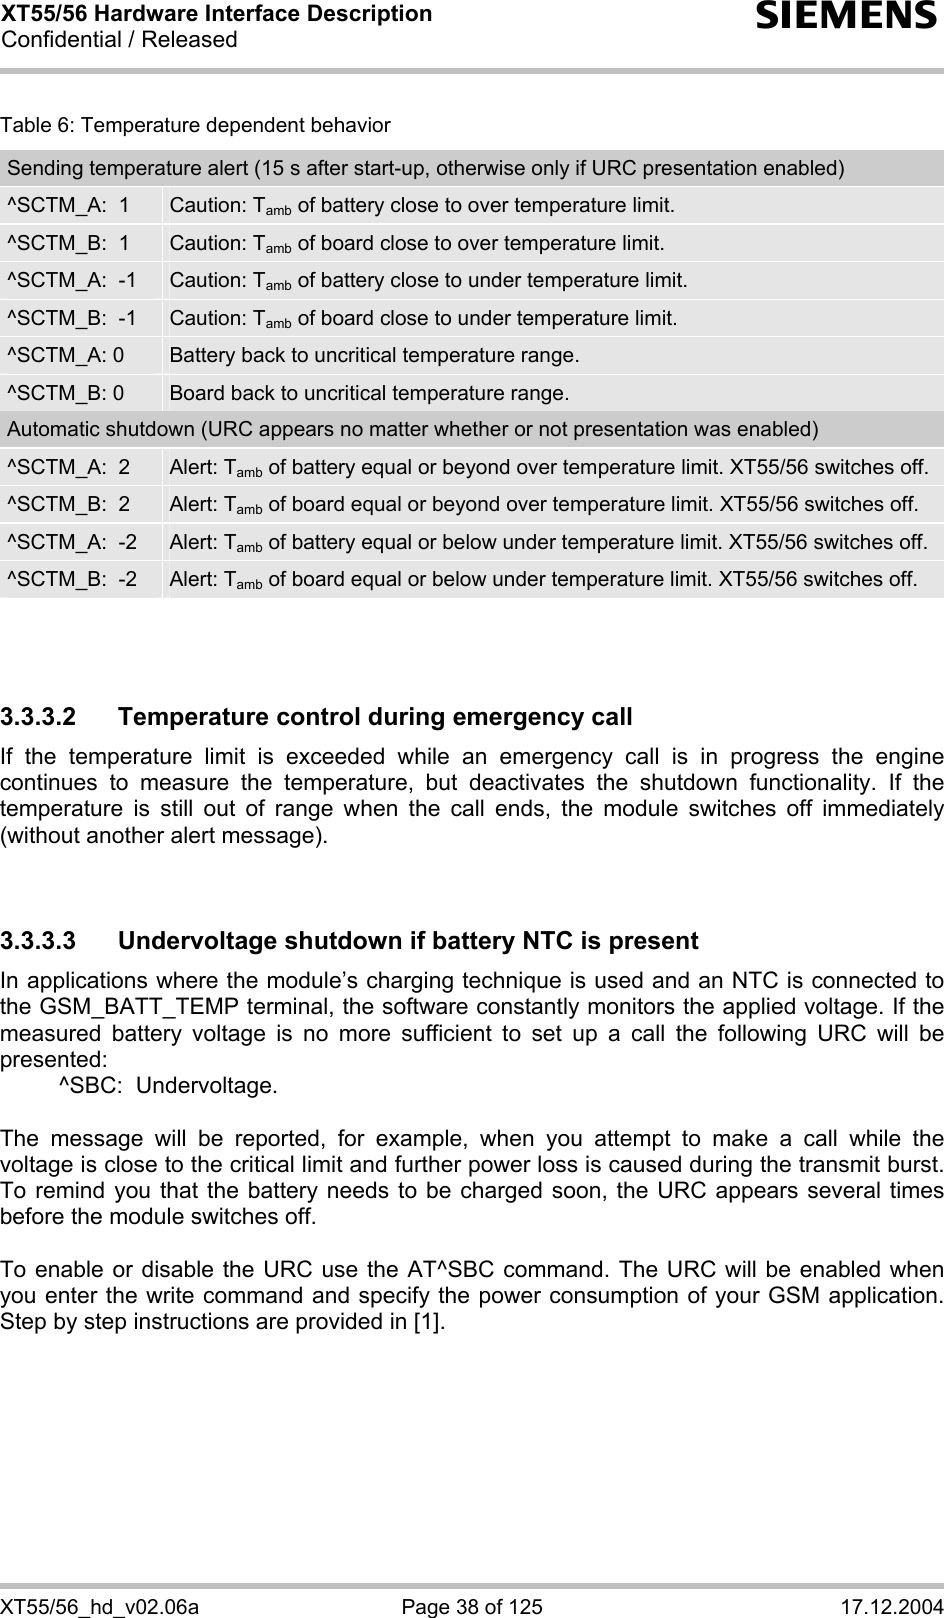 XT55/56 Hardware Interface Description Confidential / Released s XT55/56_hd_v02.06a  Page 38 of 125  17.12.2004 Table 6: Temperature dependent behavior Sending temperature alert (15 s after start-up, otherwise only if URC presentation enabled) ^SCTM_A:  1  Caution: Tamb of battery close to over temperature limit. ^SCTM_B:  1  Caution: Tamb of board close to over temperature limit. ^SCTM_A:  -1  Caution: Tamb of battery close to under temperature limit. ^SCTM_B:  -1  Caution: Tamb of board close to under temperature limit. ^SCTM_A: 0  Battery back to uncritical temperature range. ^SCTM_B: 0  Board back to uncritical temperature range. Automatic shutdown (URC appears no matter whether or not presentation was enabled) ^SCTM_A:  2  Alert: Tamb of battery equal or beyond over temperature limit. XT55/56 switches off. ^SCTM_B:  2  Alert: Tamb of board equal or beyond over temperature limit. XT55/56 switches off. ^SCTM_A:  -2  Alert: Tamb of battery equal or below under temperature limit. XT55/56 switches off. ^SCTM_B:  -2  Alert: Tamb of board equal or below under temperature limit. XT55/56 switches off.    3.3.3.2  Temperature control during emergency call If the temperature limit is exceeded while an emergency call is in progress the engine continues to measure the temperature, but deactivates the shutdown functionality. If the temperature is still out of range when the call ends, the module switches off immediately (without another alert message).   3.3.3.3  Undervoltage shutdown if battery NTC is present In applications where the module’s charging technique is used and an NTC is connected to the GSM_BATT_TEMP terminal, the software constantly monitors the applied voltage. If the measured battery voltage is no more sufficient to set up a call the following URC will be presented:    ^SBC:  Undervoltage.  The message will be reported, for example, when you attempt to make a call while the voltage is close to the critical limit and further power loss is caused during the transmit burst. To remind you that the battery needs to be charged soon, the URC appears several times before the module switches off.   To enable or disable the URC use the AT^SBC command. The URC will be enabled when you enter the write command and specify the power consumption of your GSM application. Step by step instructions are provided in [1].   